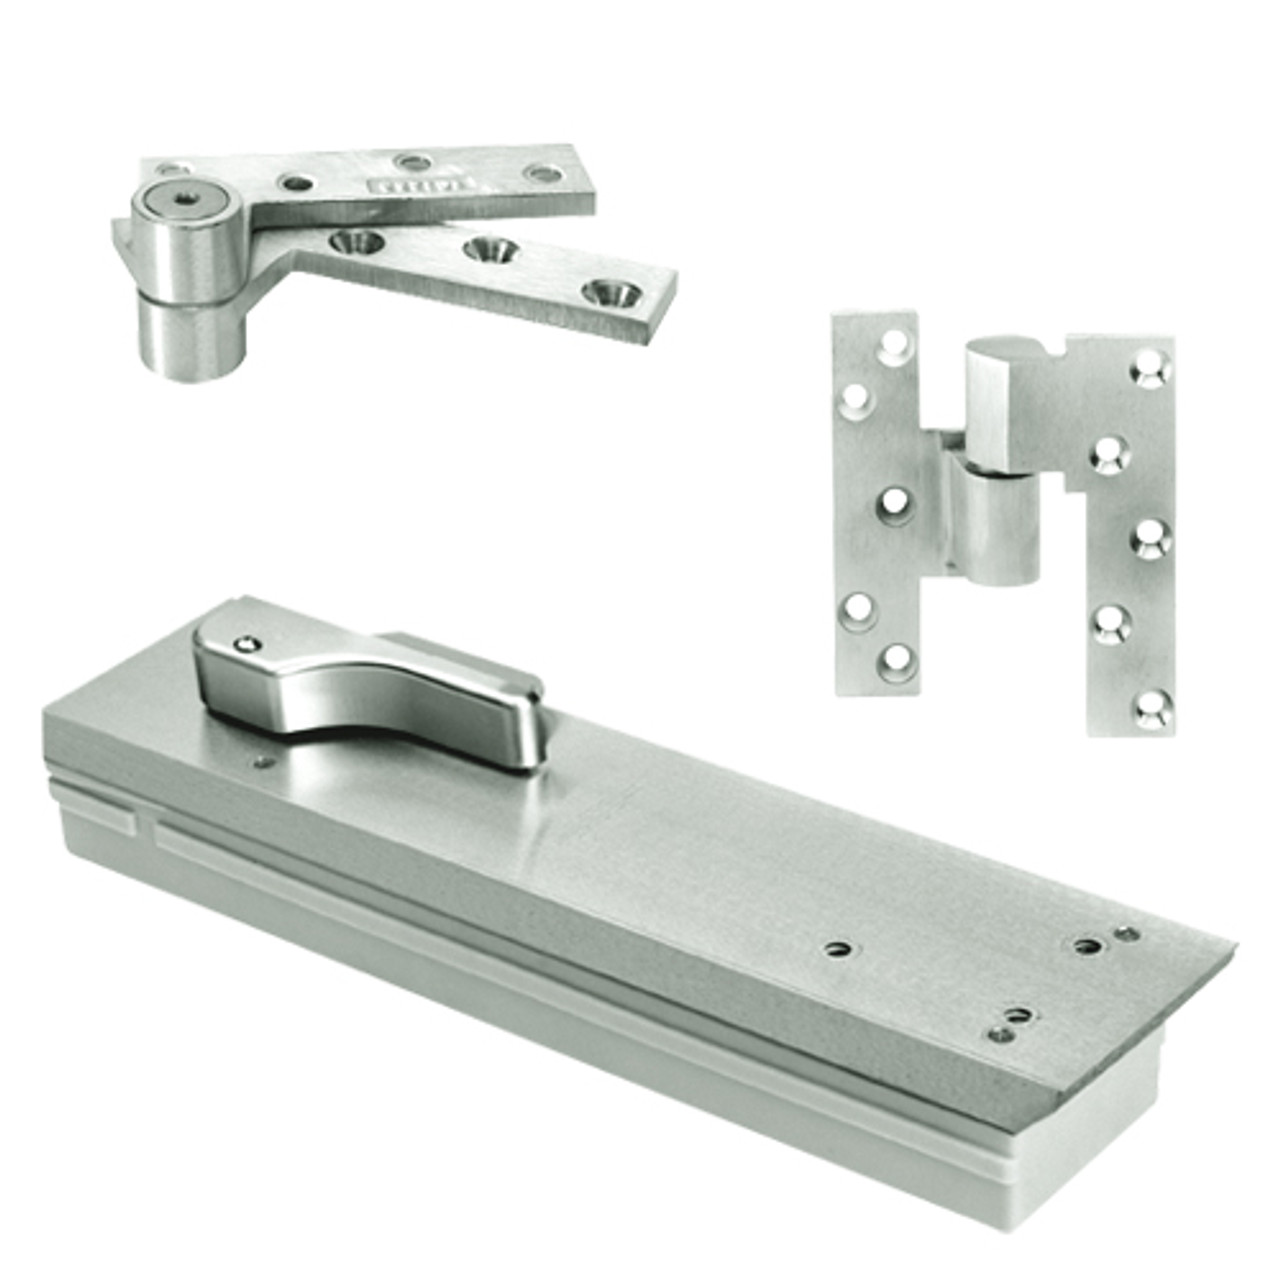 QT5103ABC105-LH-618 Rixson Q51 Series 3/4" Offset Hung Shallow Depth Floor Closers in Bright Nickel Finish